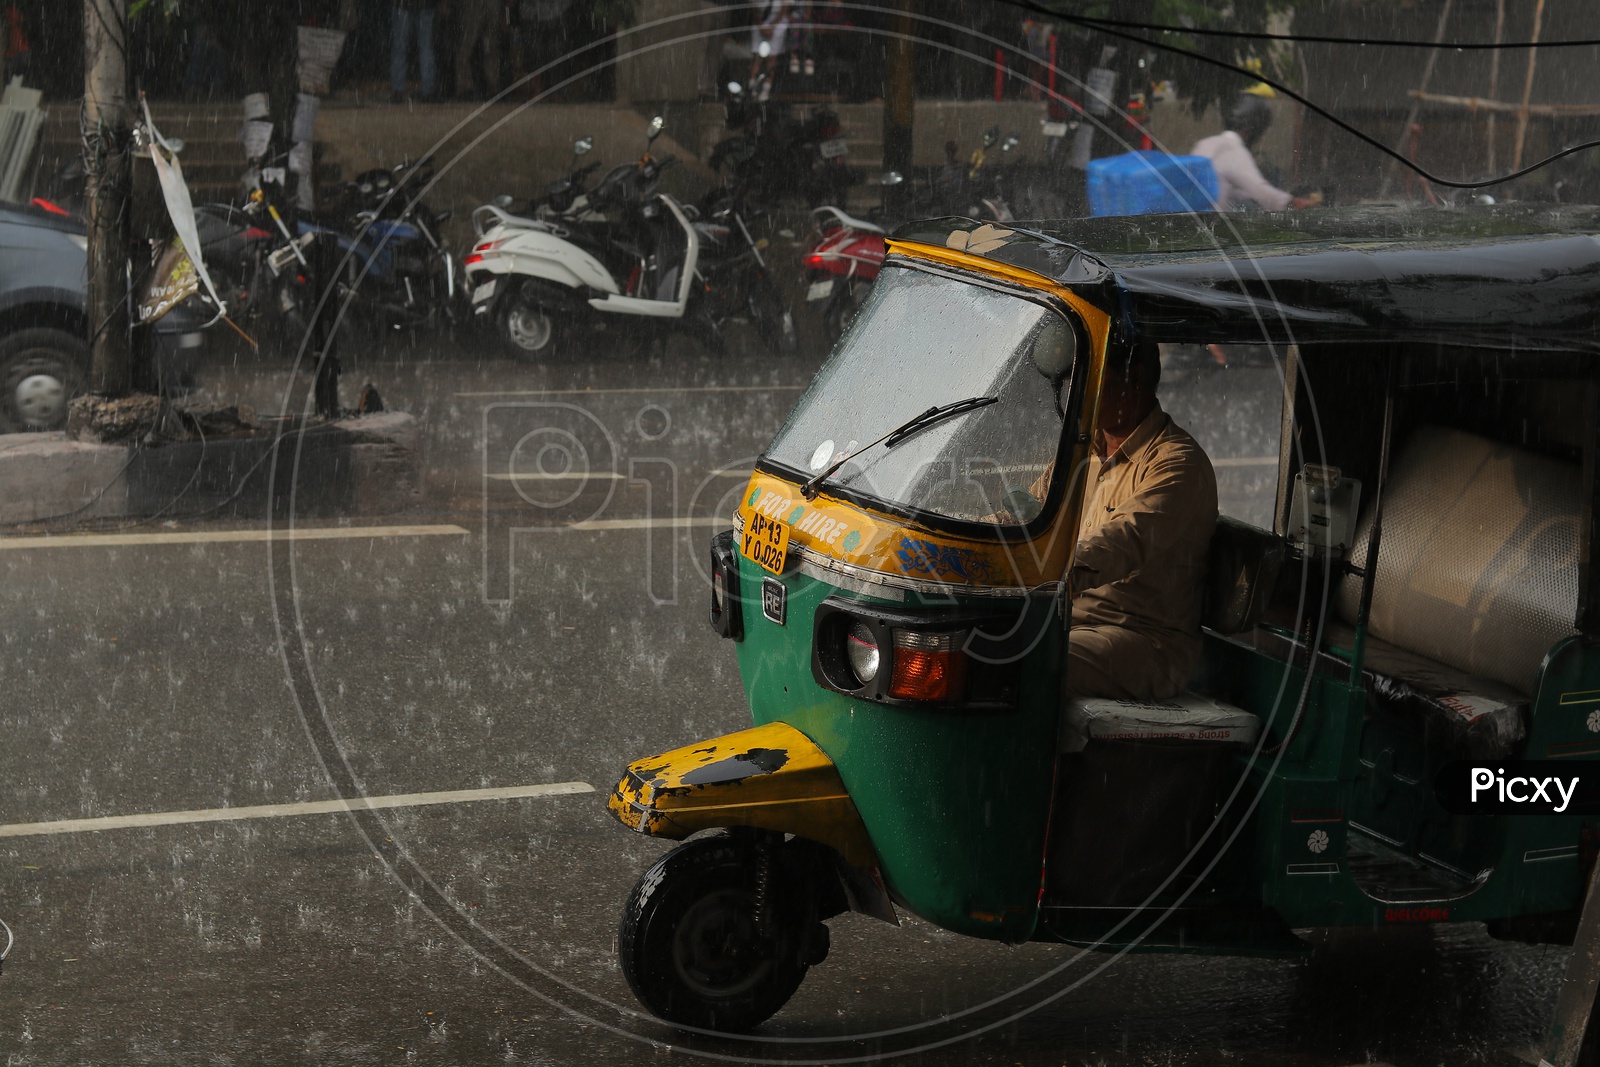 Auto moving on hyderabad roads on a rainy day